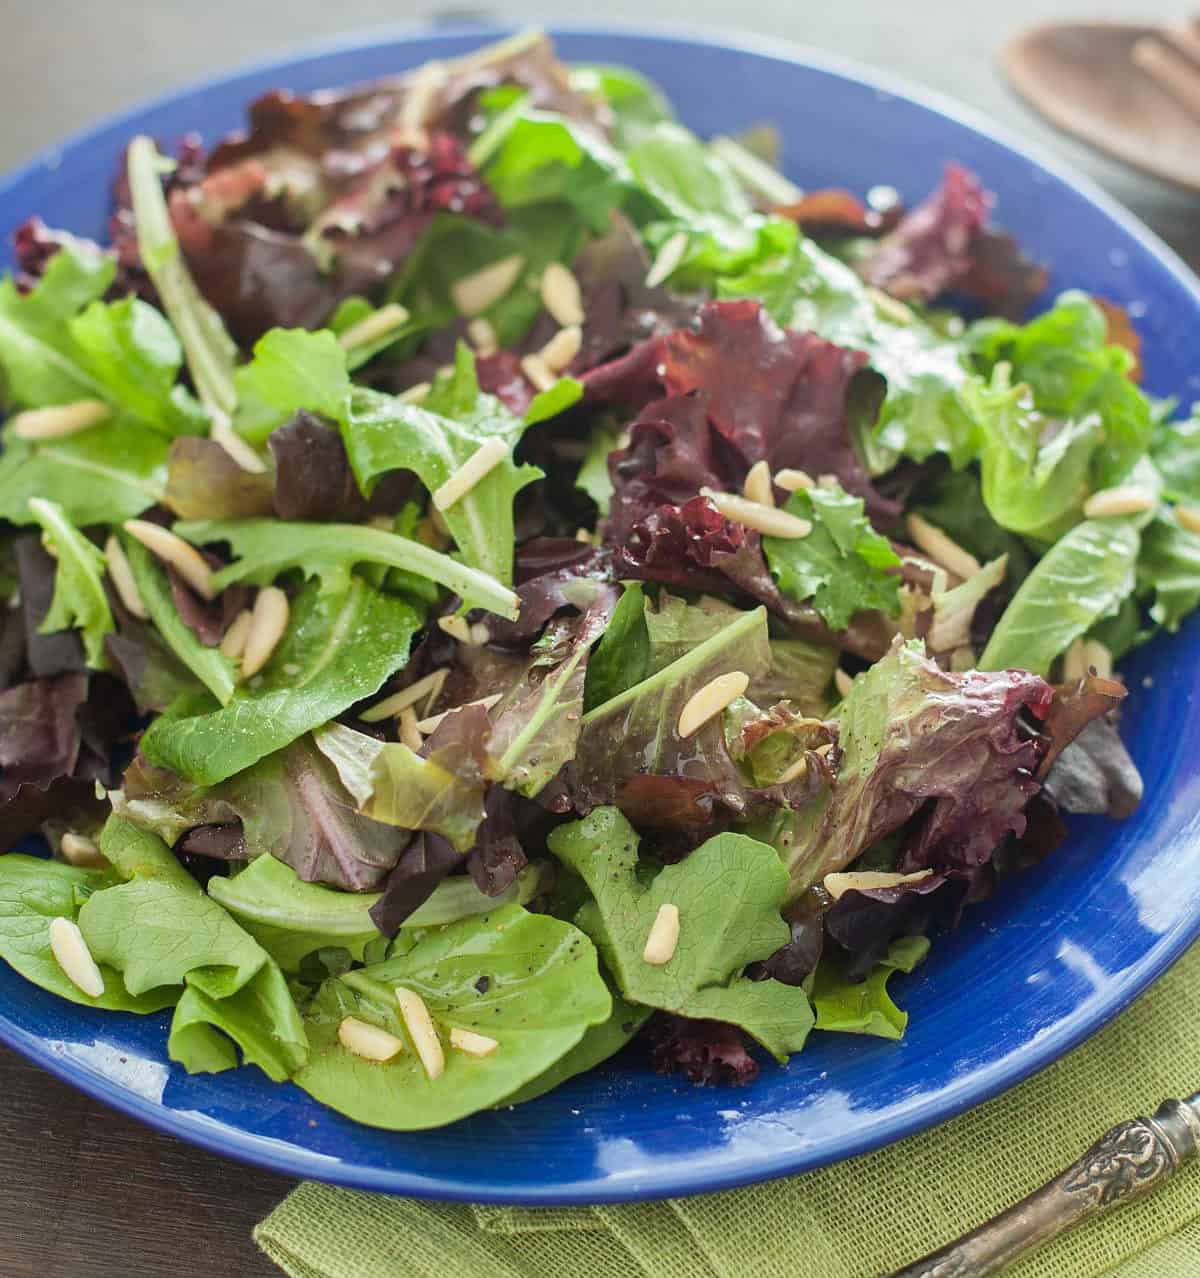  Get your daily dose of greens with this shamrock salad.